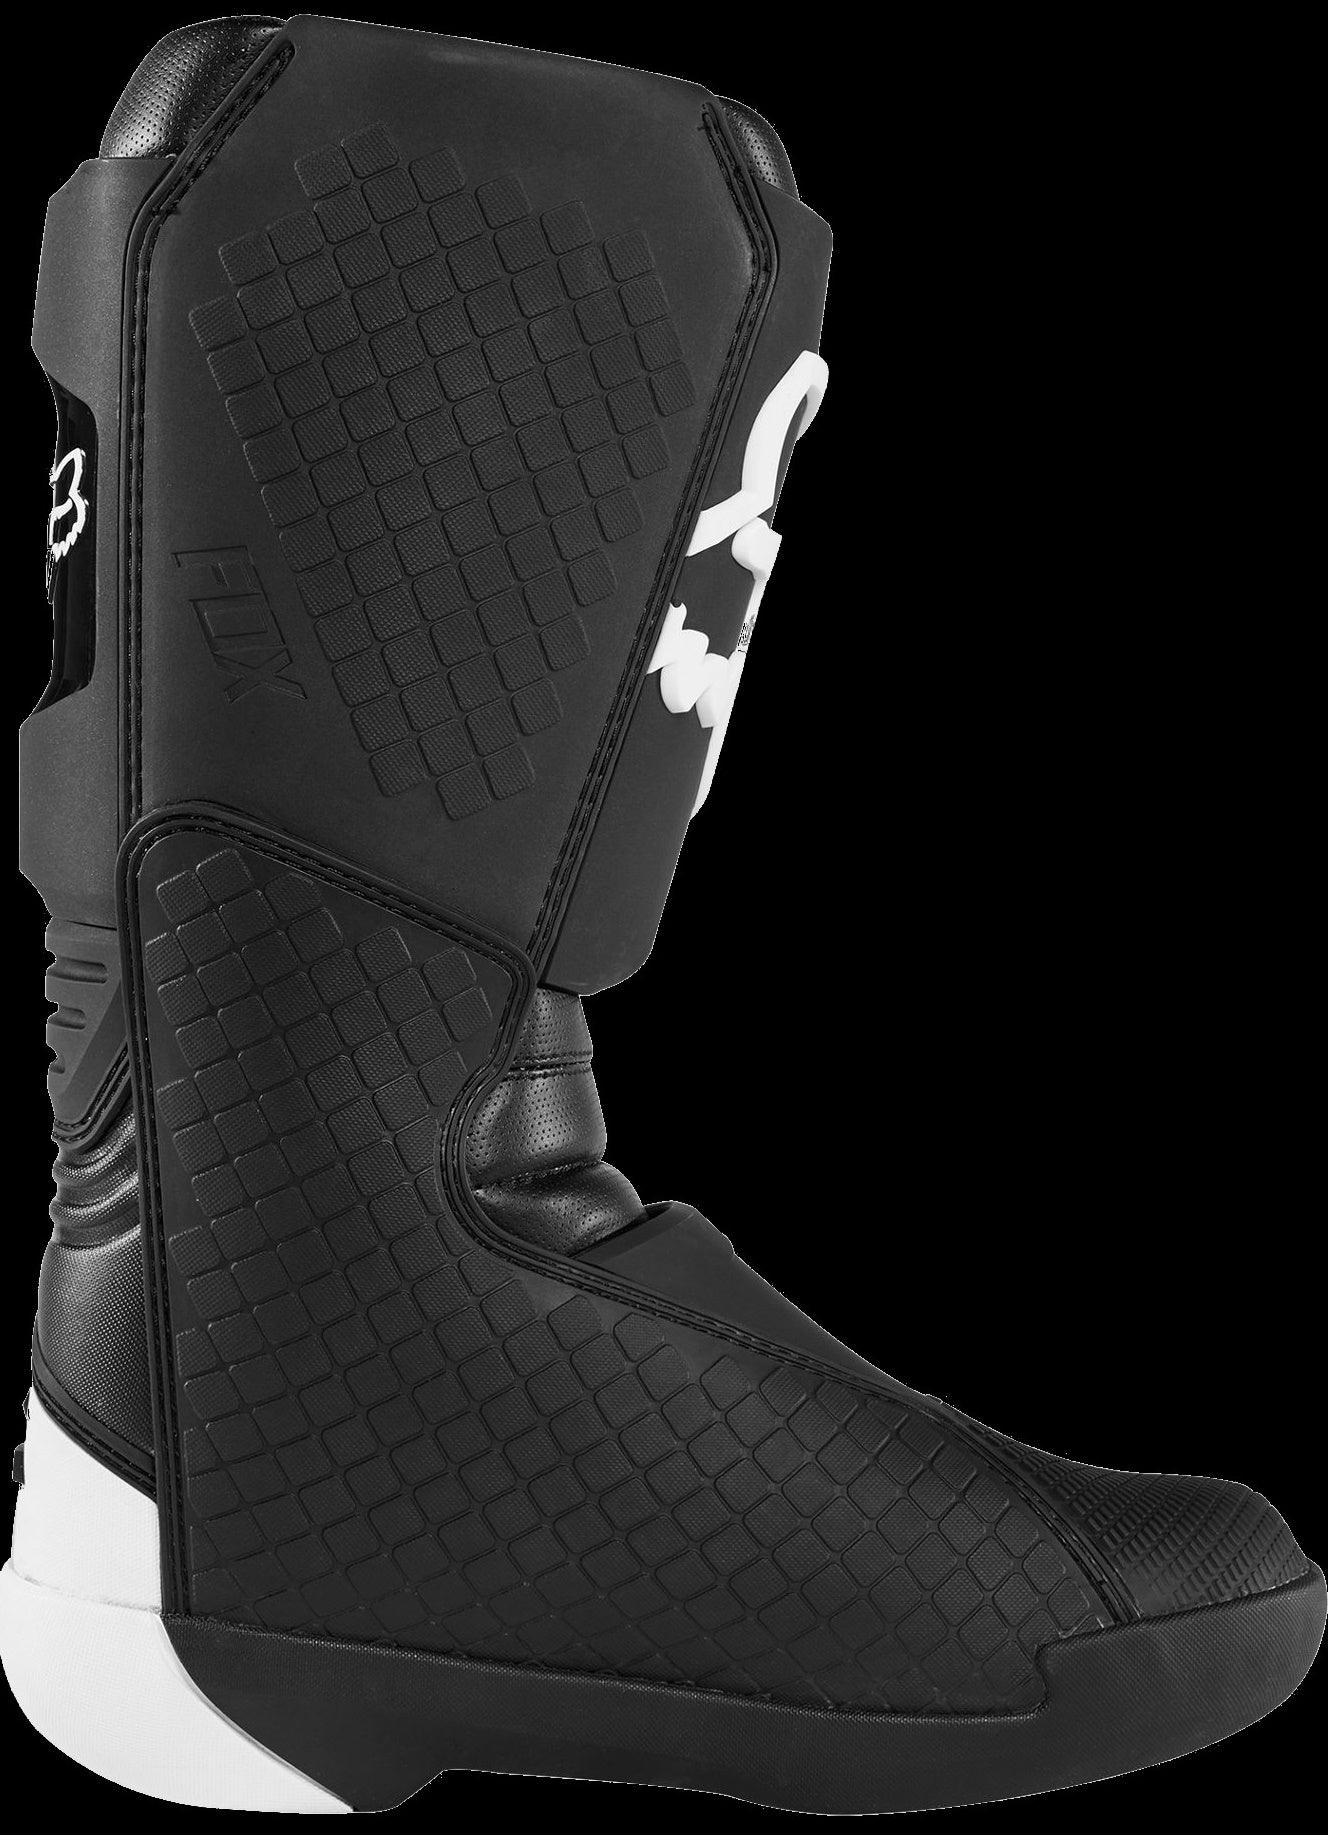 Fox Racing Comp Youth Boots Black / White